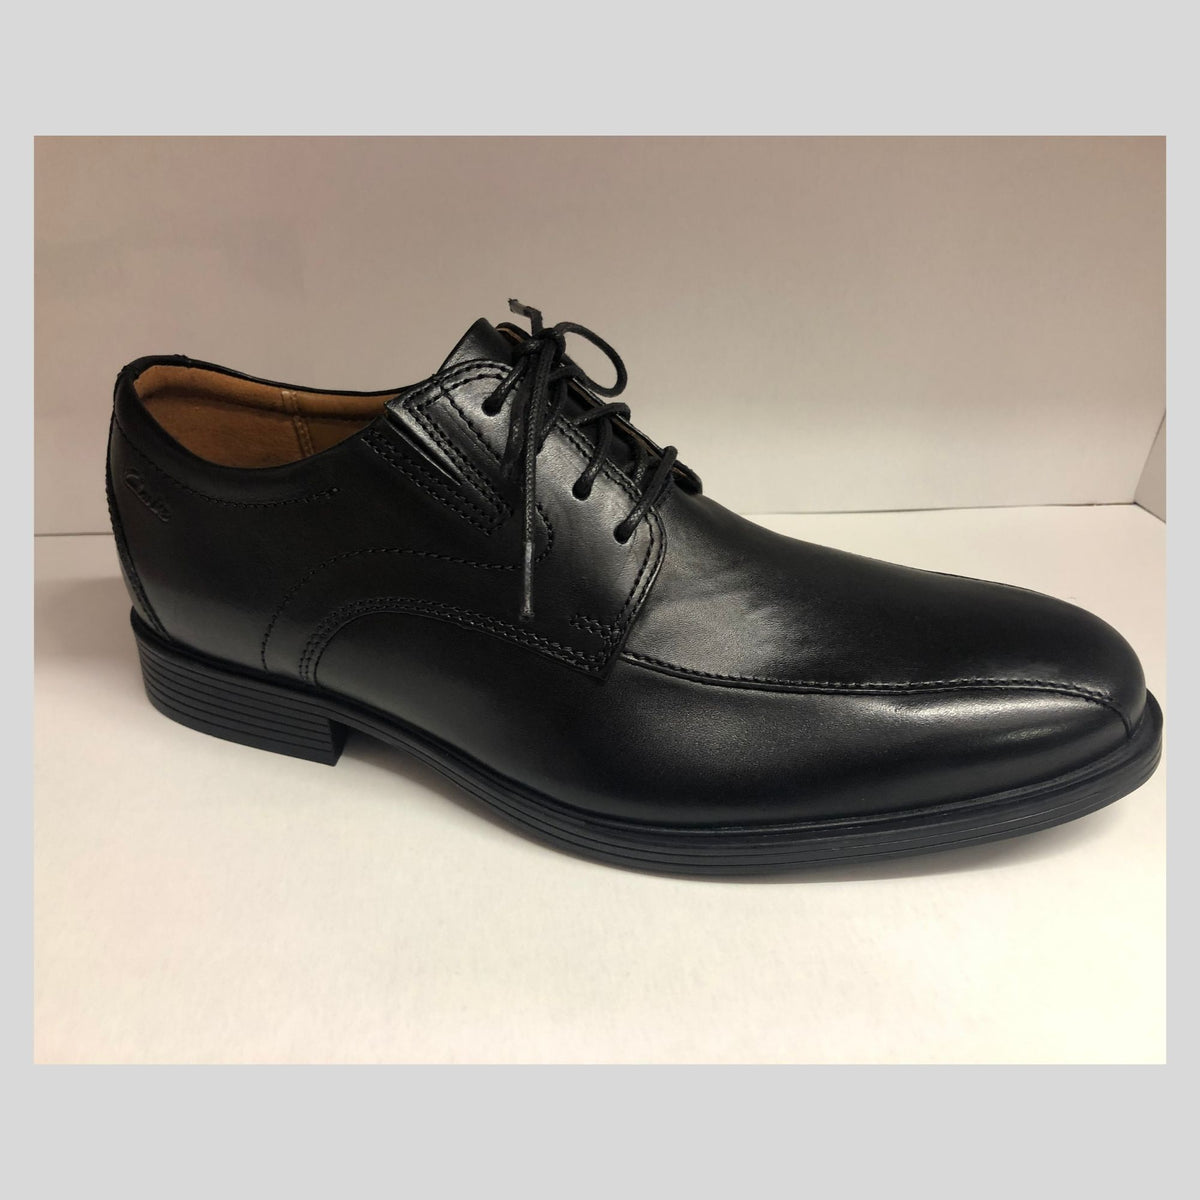 Clarks Whiddon Pace - Black Leather